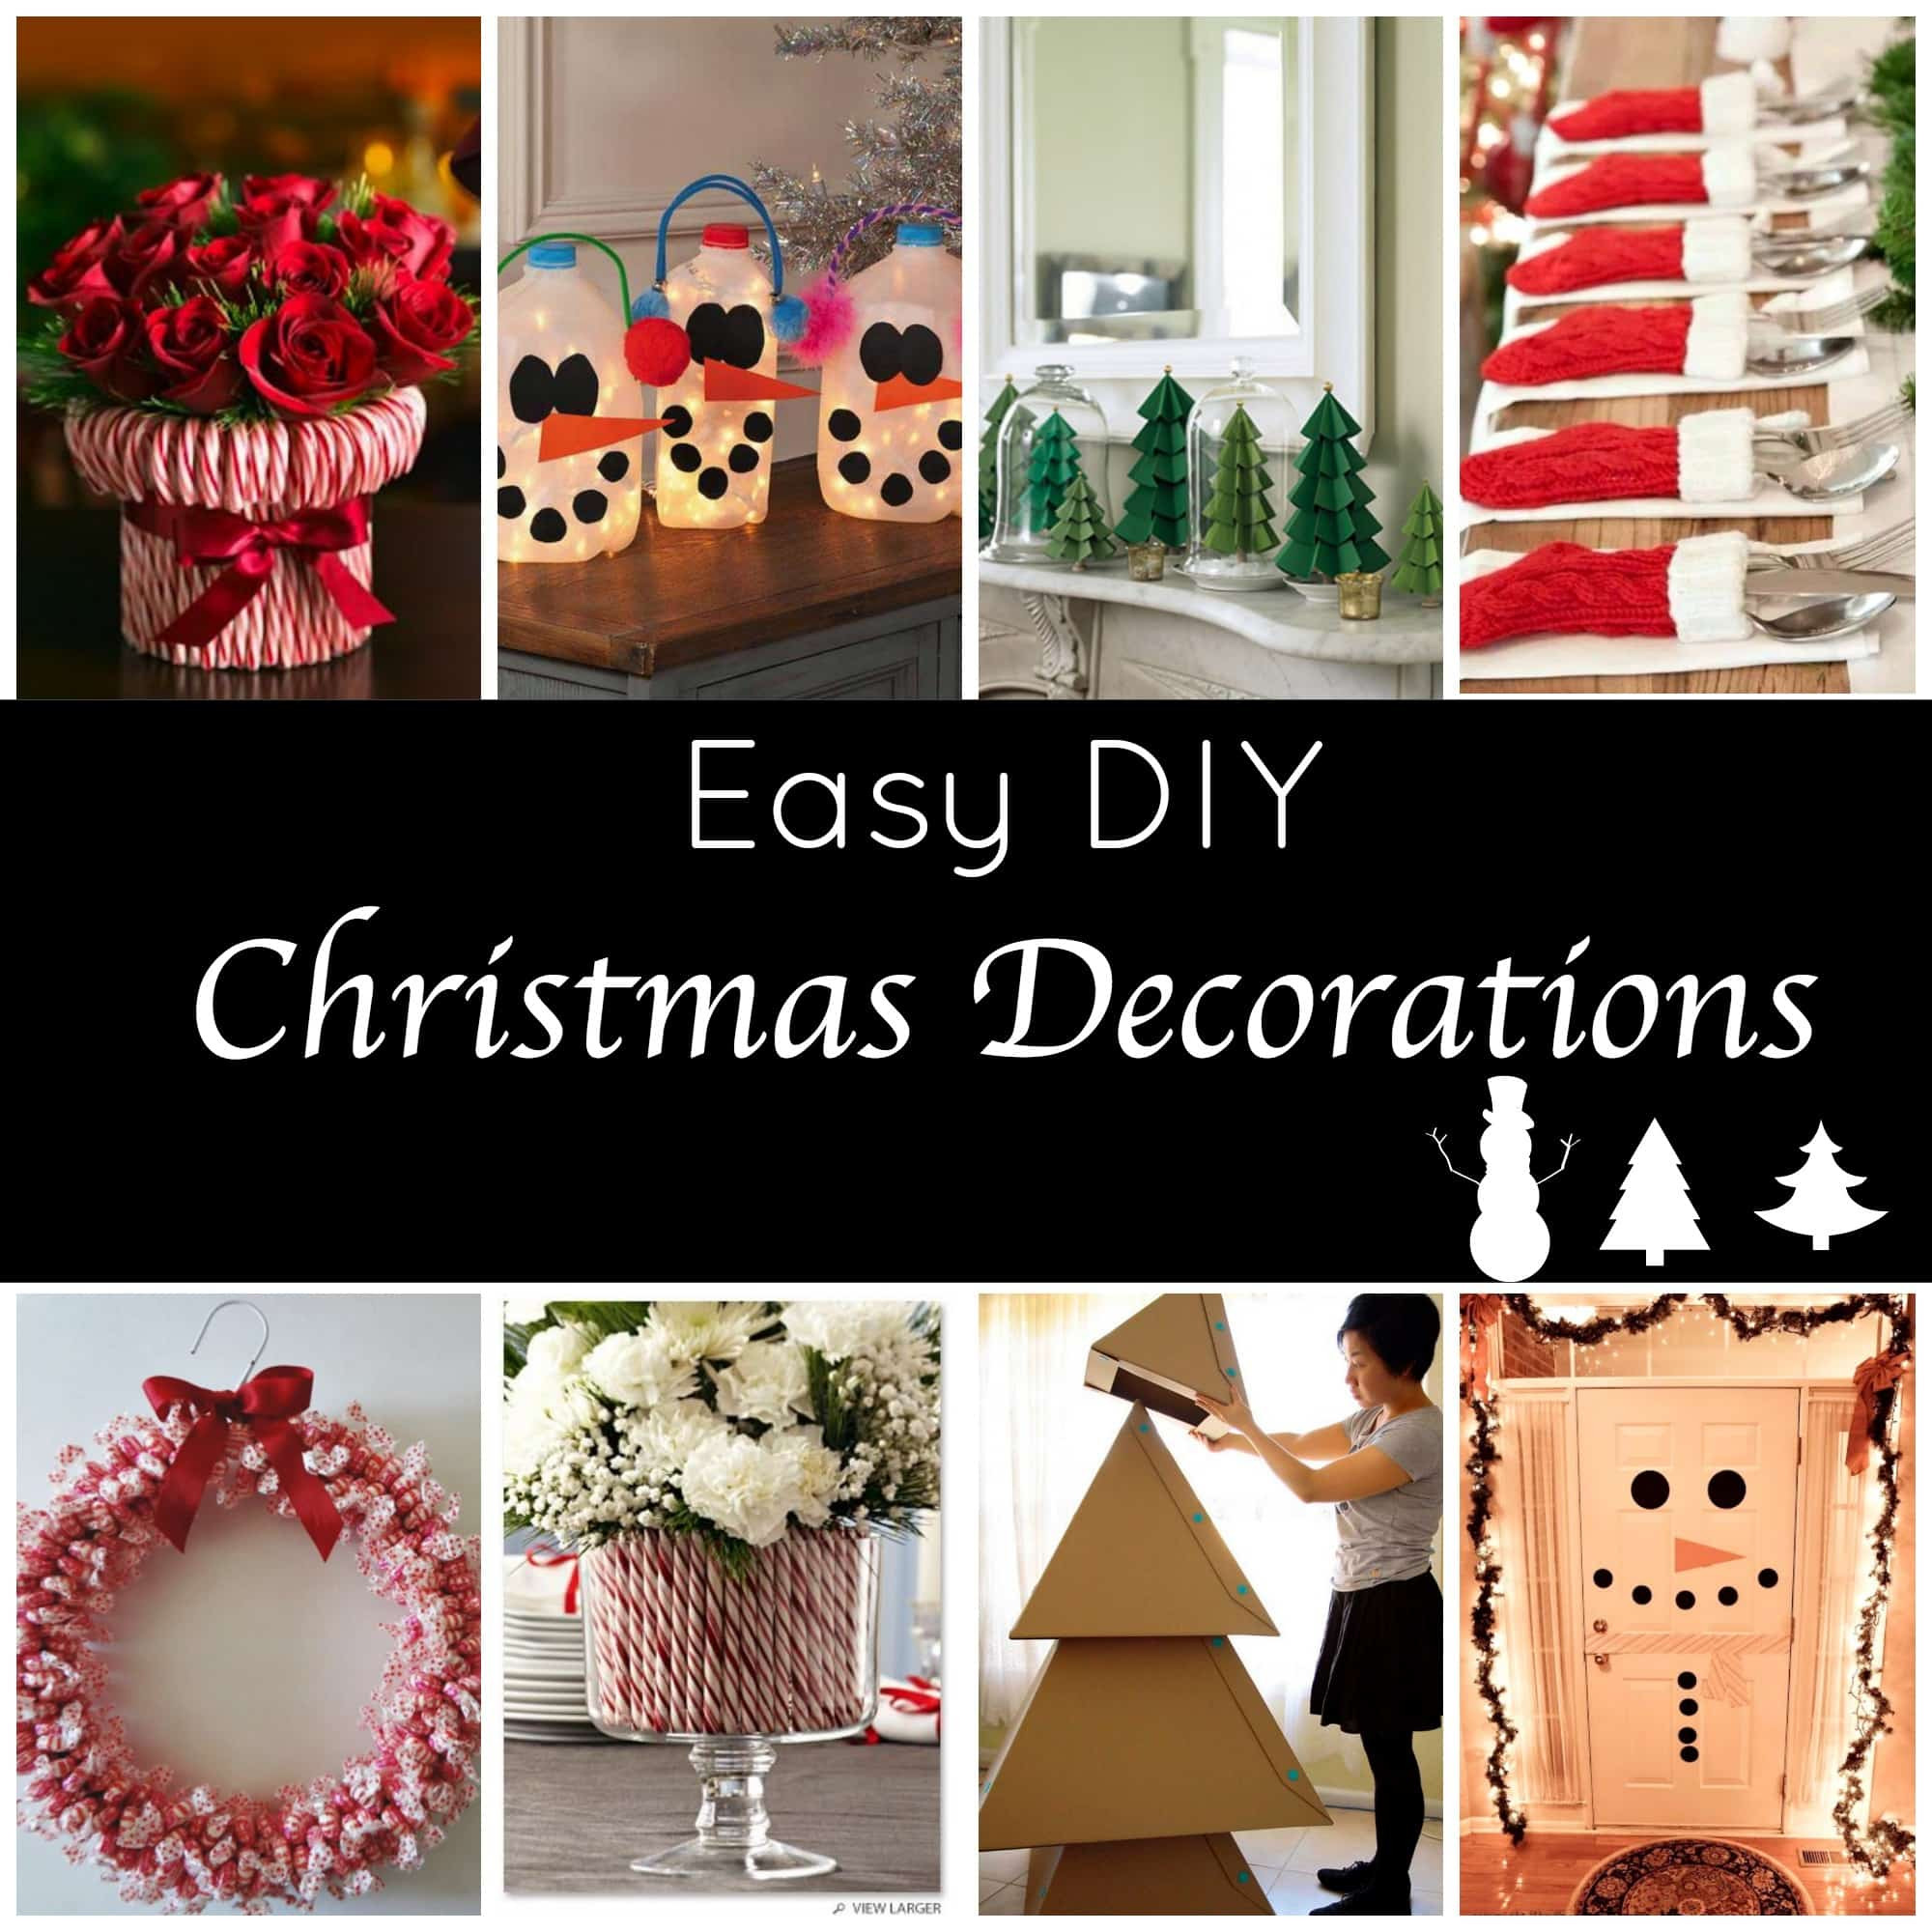 Simple DIY Christmas Decorations
 Cute & Easy Holiday Decorations Page 2 of 2 Princess